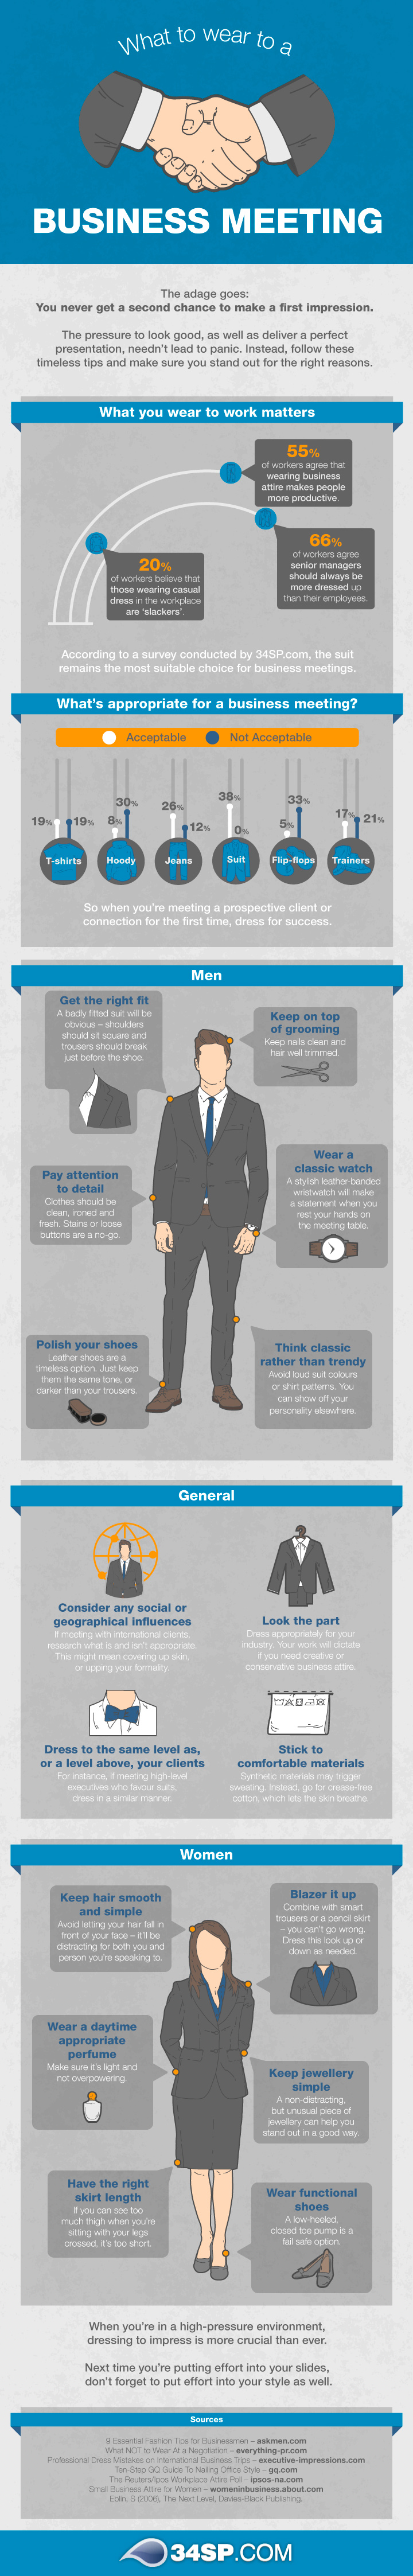 What To Wear To A Business Meeting